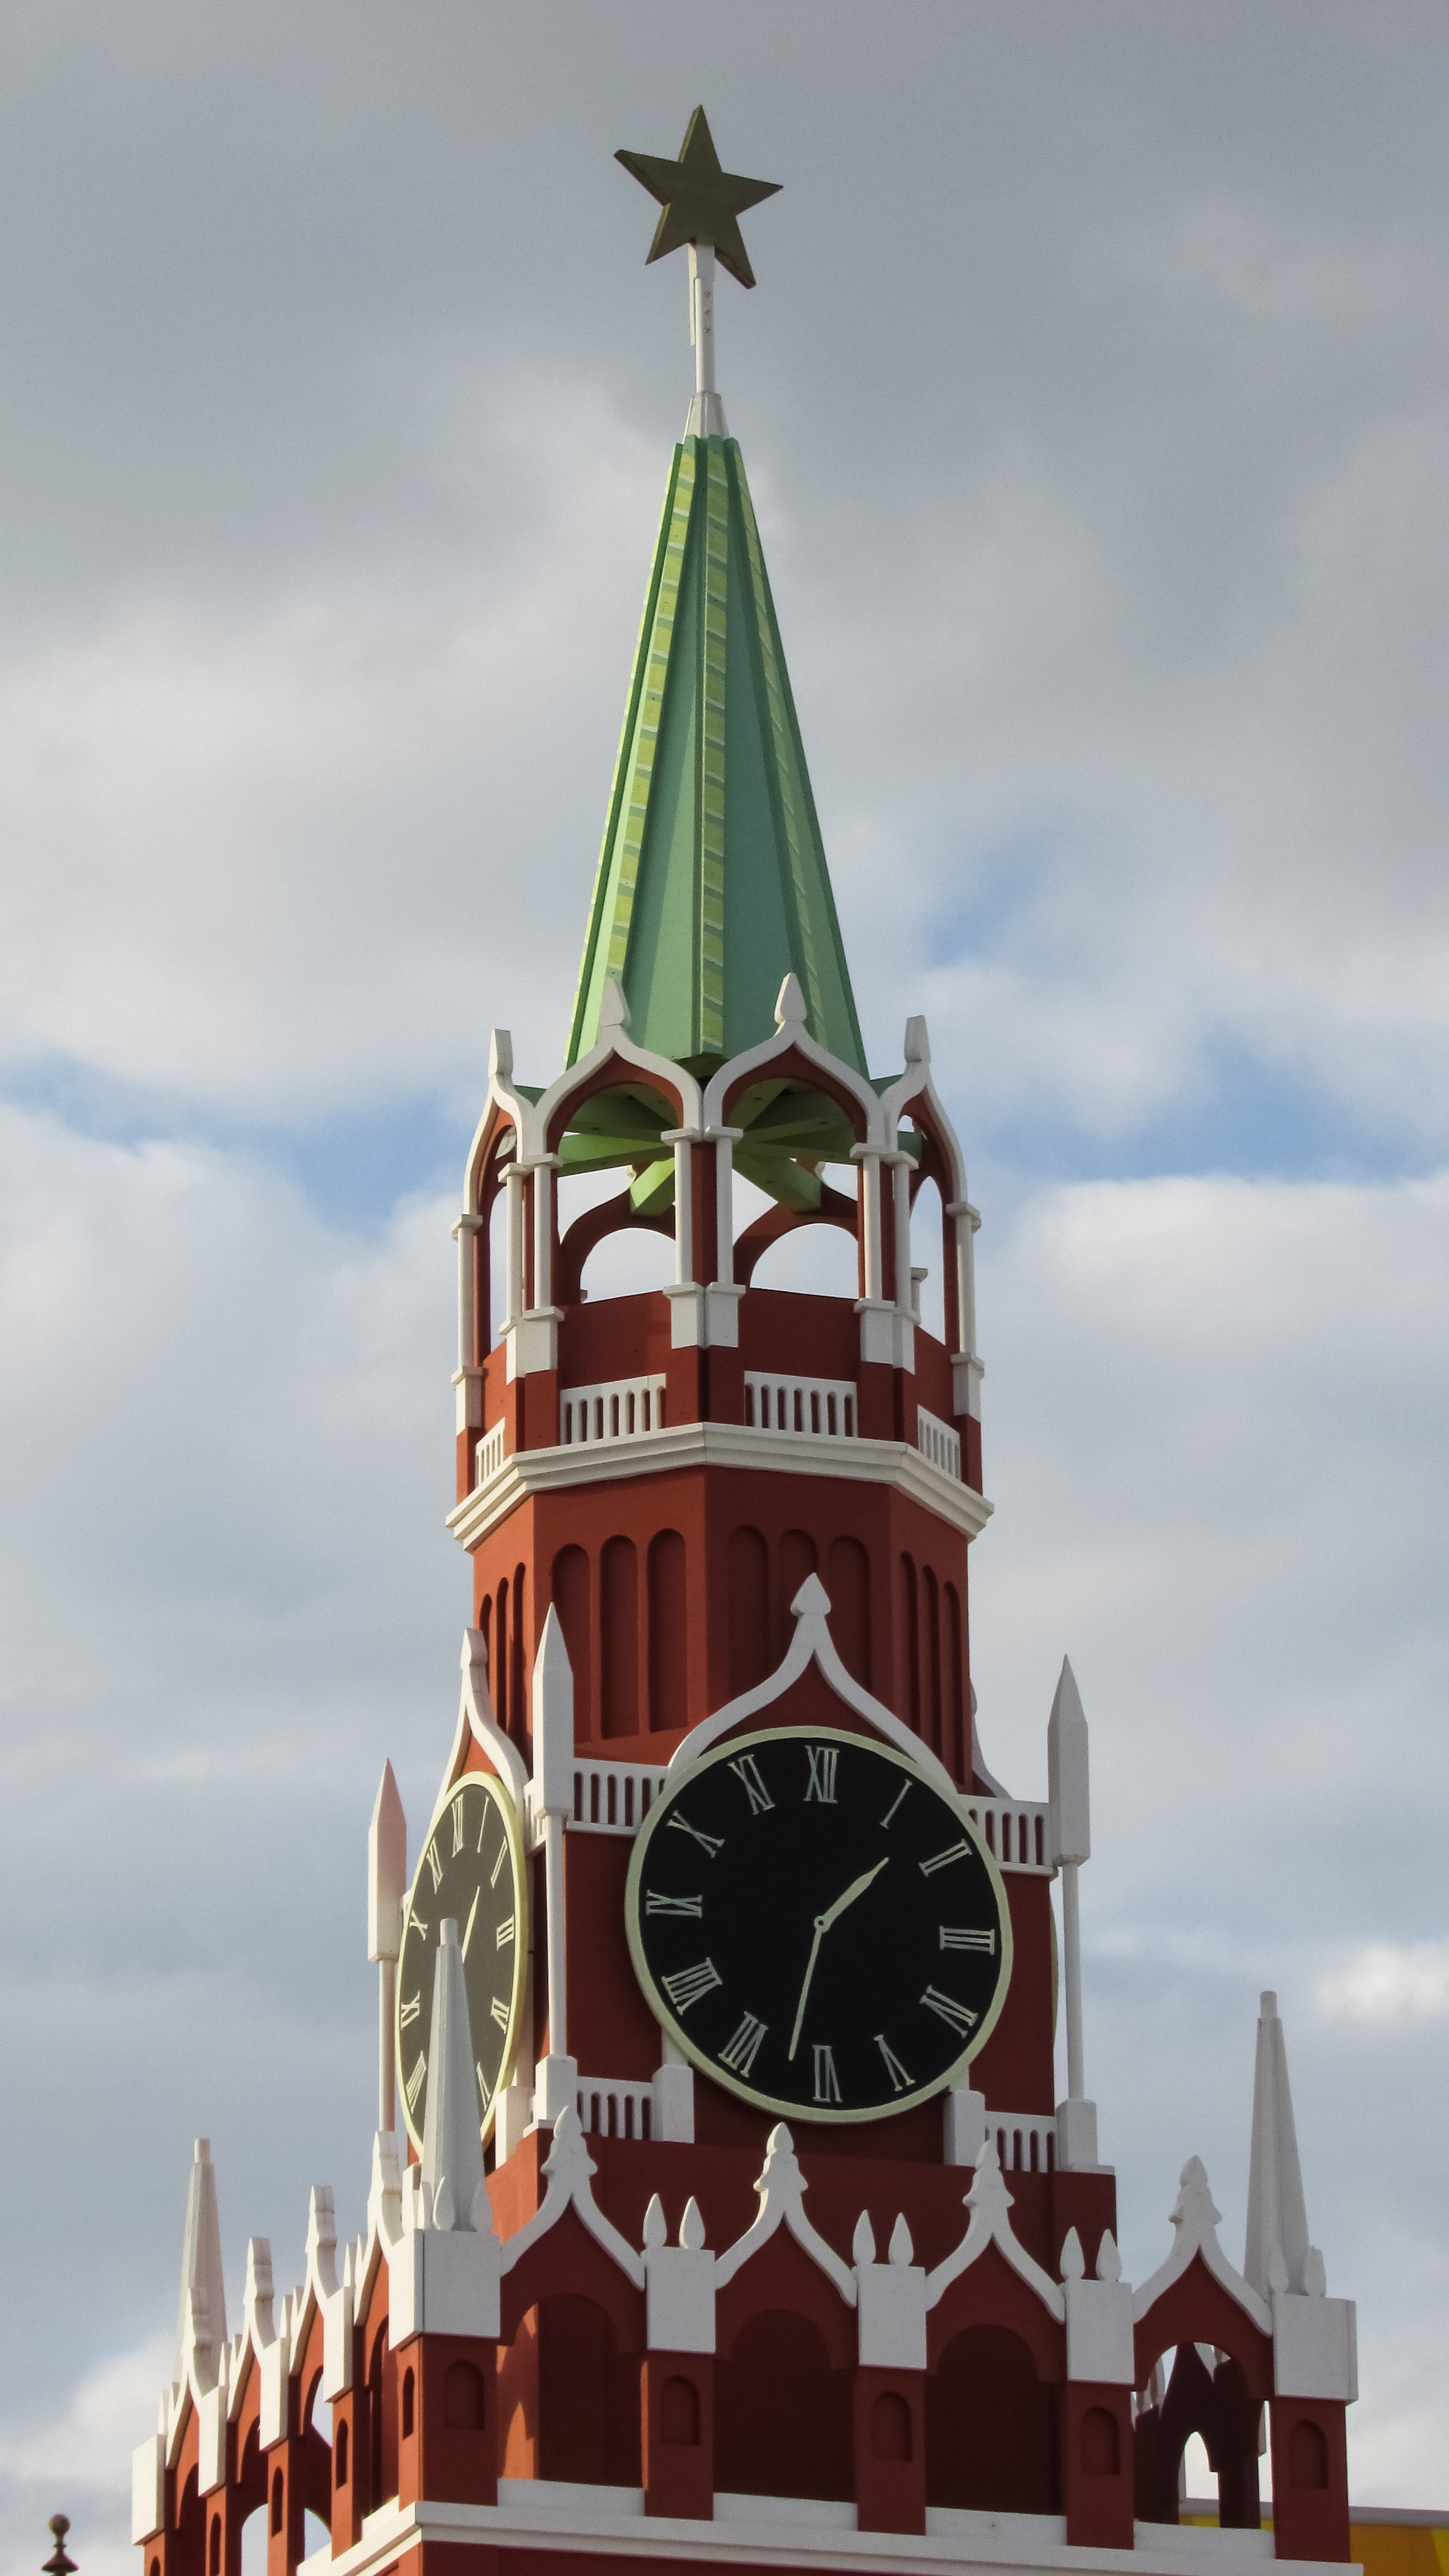 green and brown  tower clock